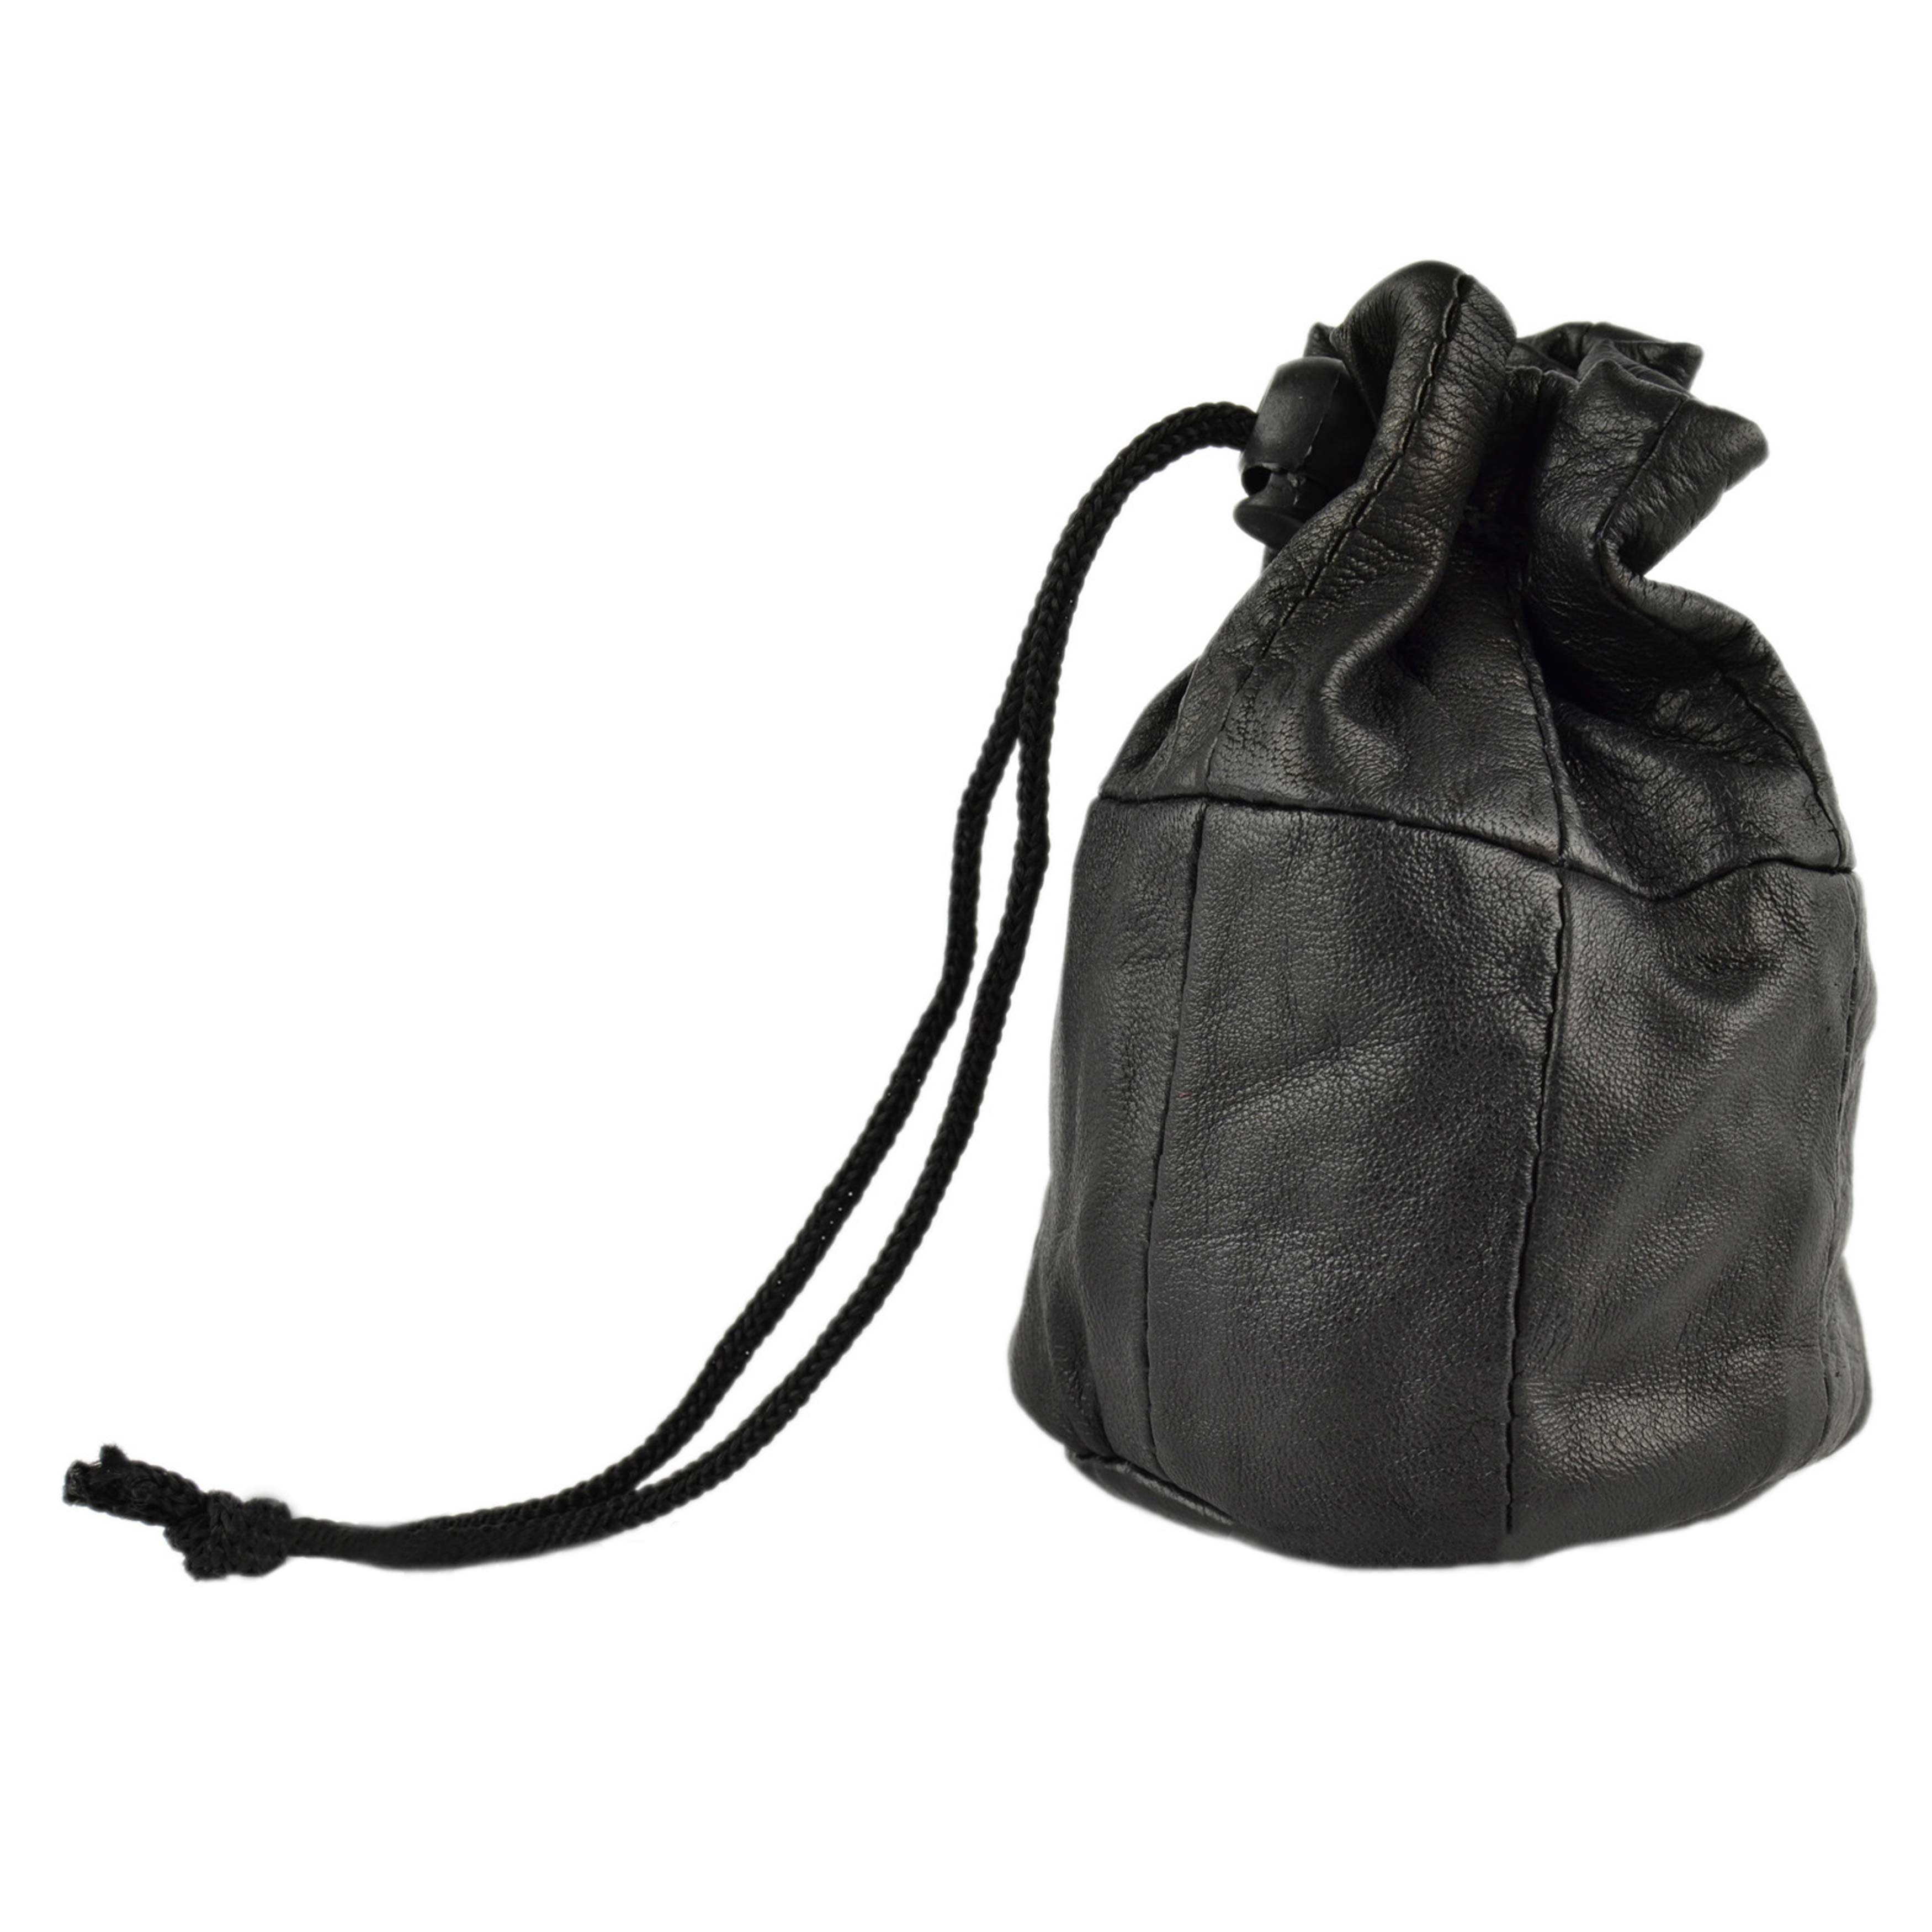 Lined Black Soft Leather Drawstring Wrist Pouch Coin Purse Change Handy 5055527706718 | eBay